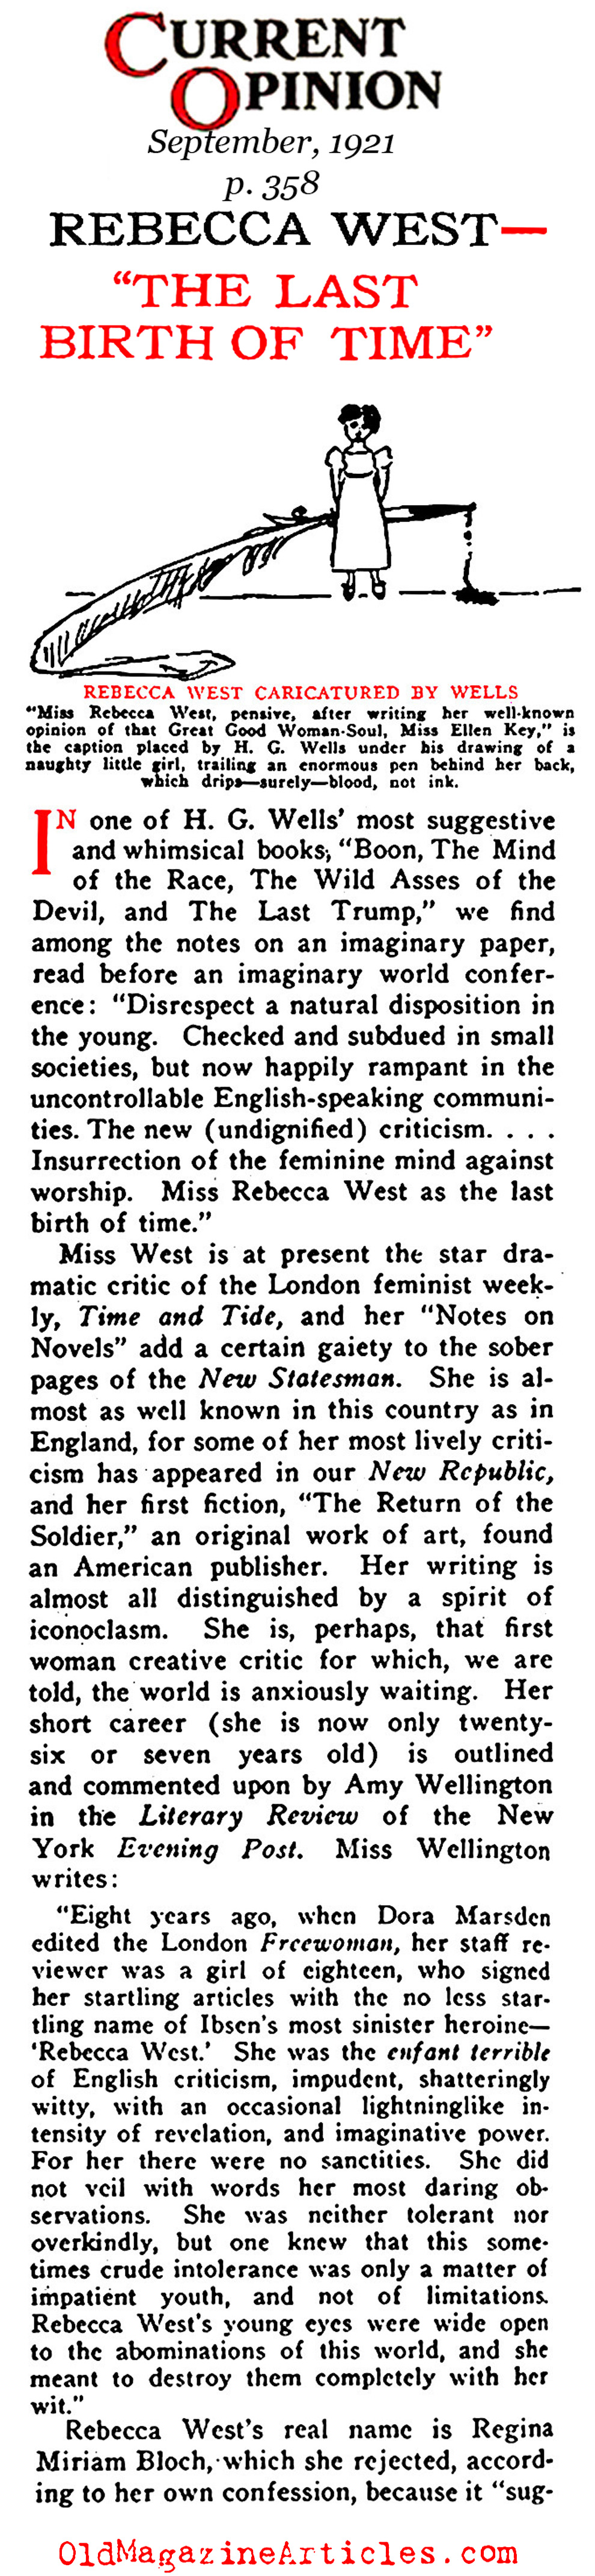 Rebecca West: <i>The Last Birth of Time</i> (Current Opinion, 1921)